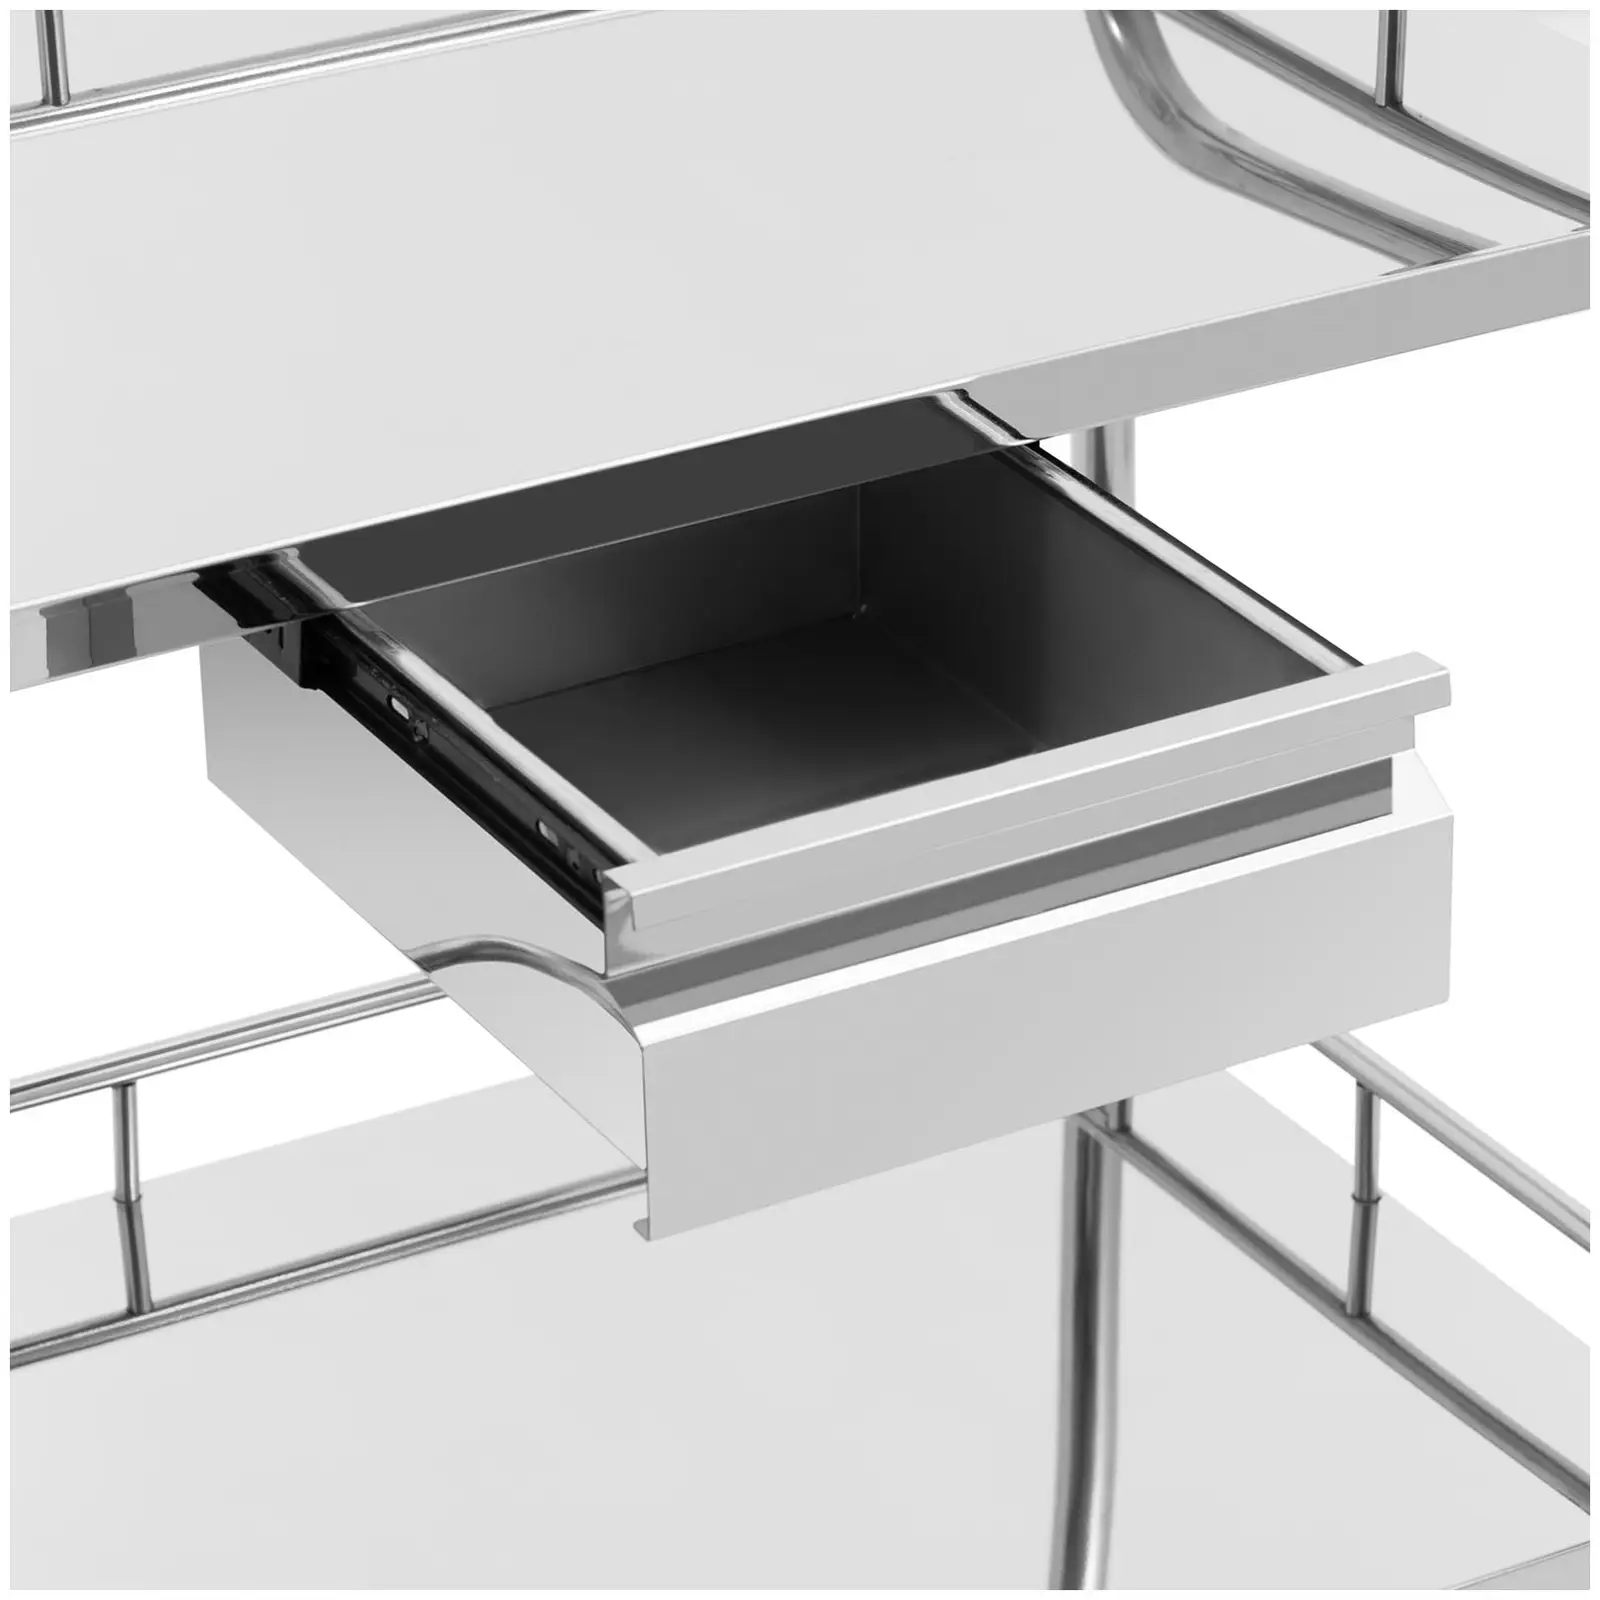 Laboratory Trolley - stainless steel - 2 shelves each 74 x 44 x 13 cm - 1 drawer - 20 kg